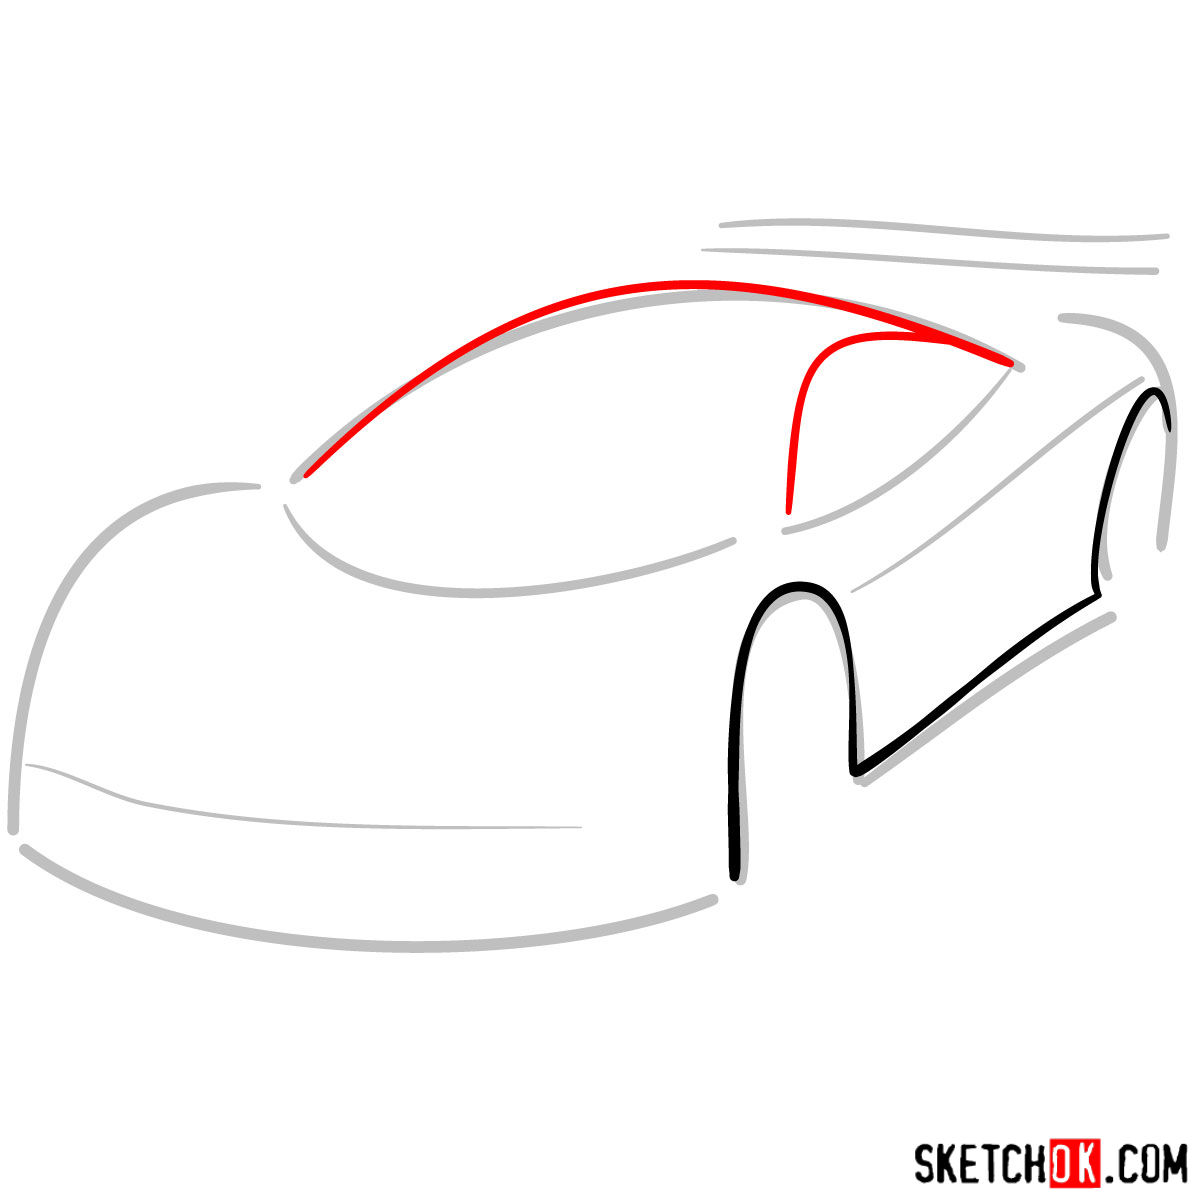 McLaren F1 - step by step drawing guide - step 03